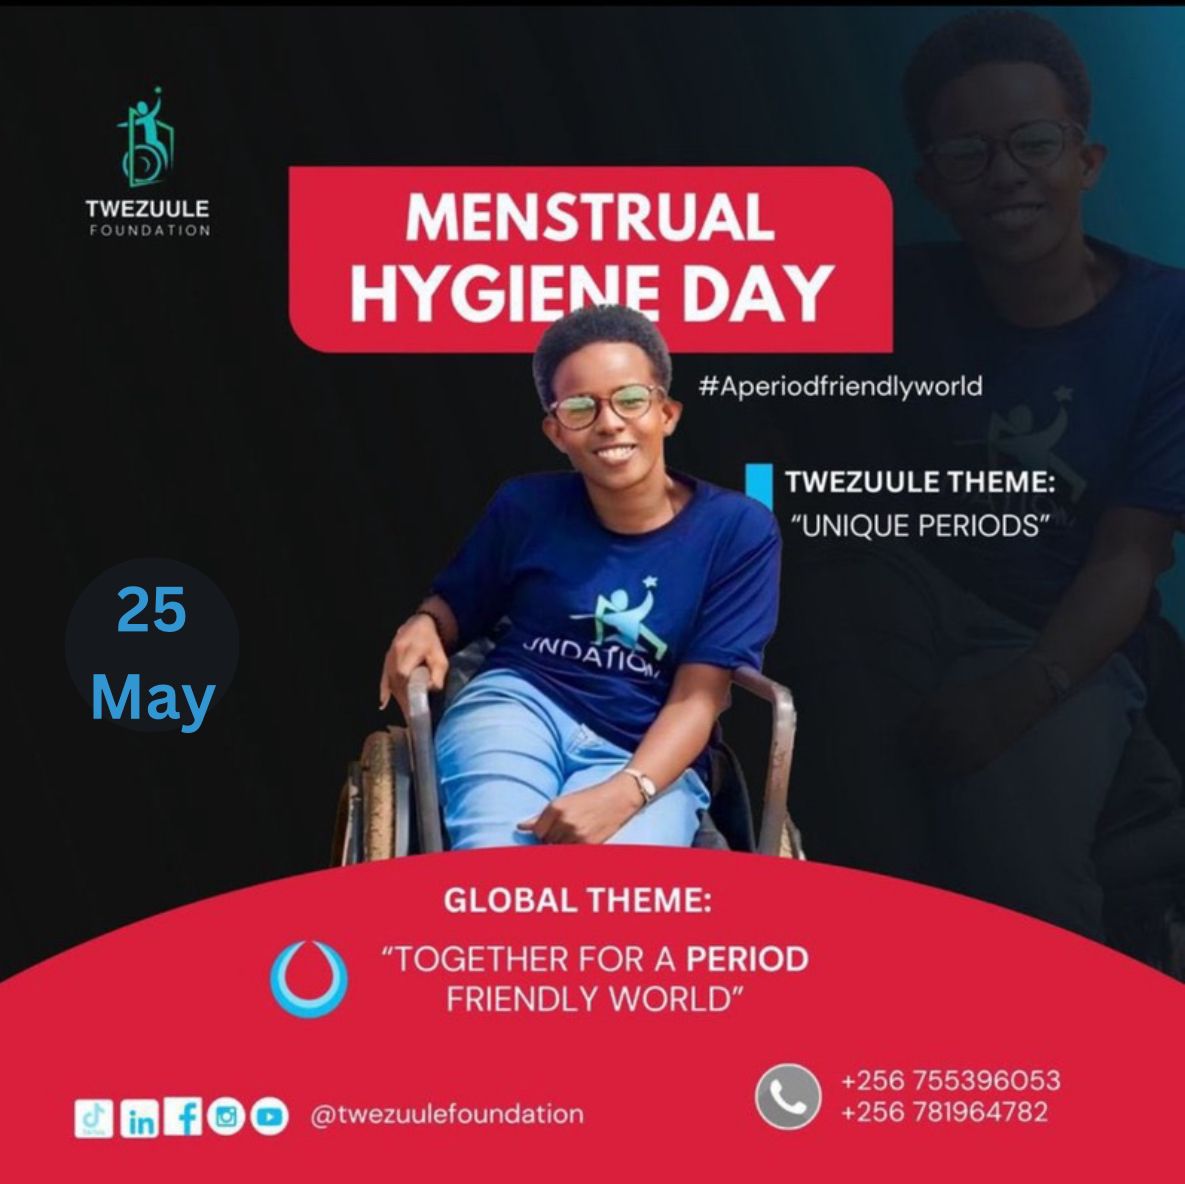 We shall join @TwezuuleF in providing dignified menstruation support to girls with disabilities. Let's normalize the conversation: menstruation is a natural aspect of every woman's life. Together, let's build a #PeriodFriendlyWorld where every girl feels empowered and respected